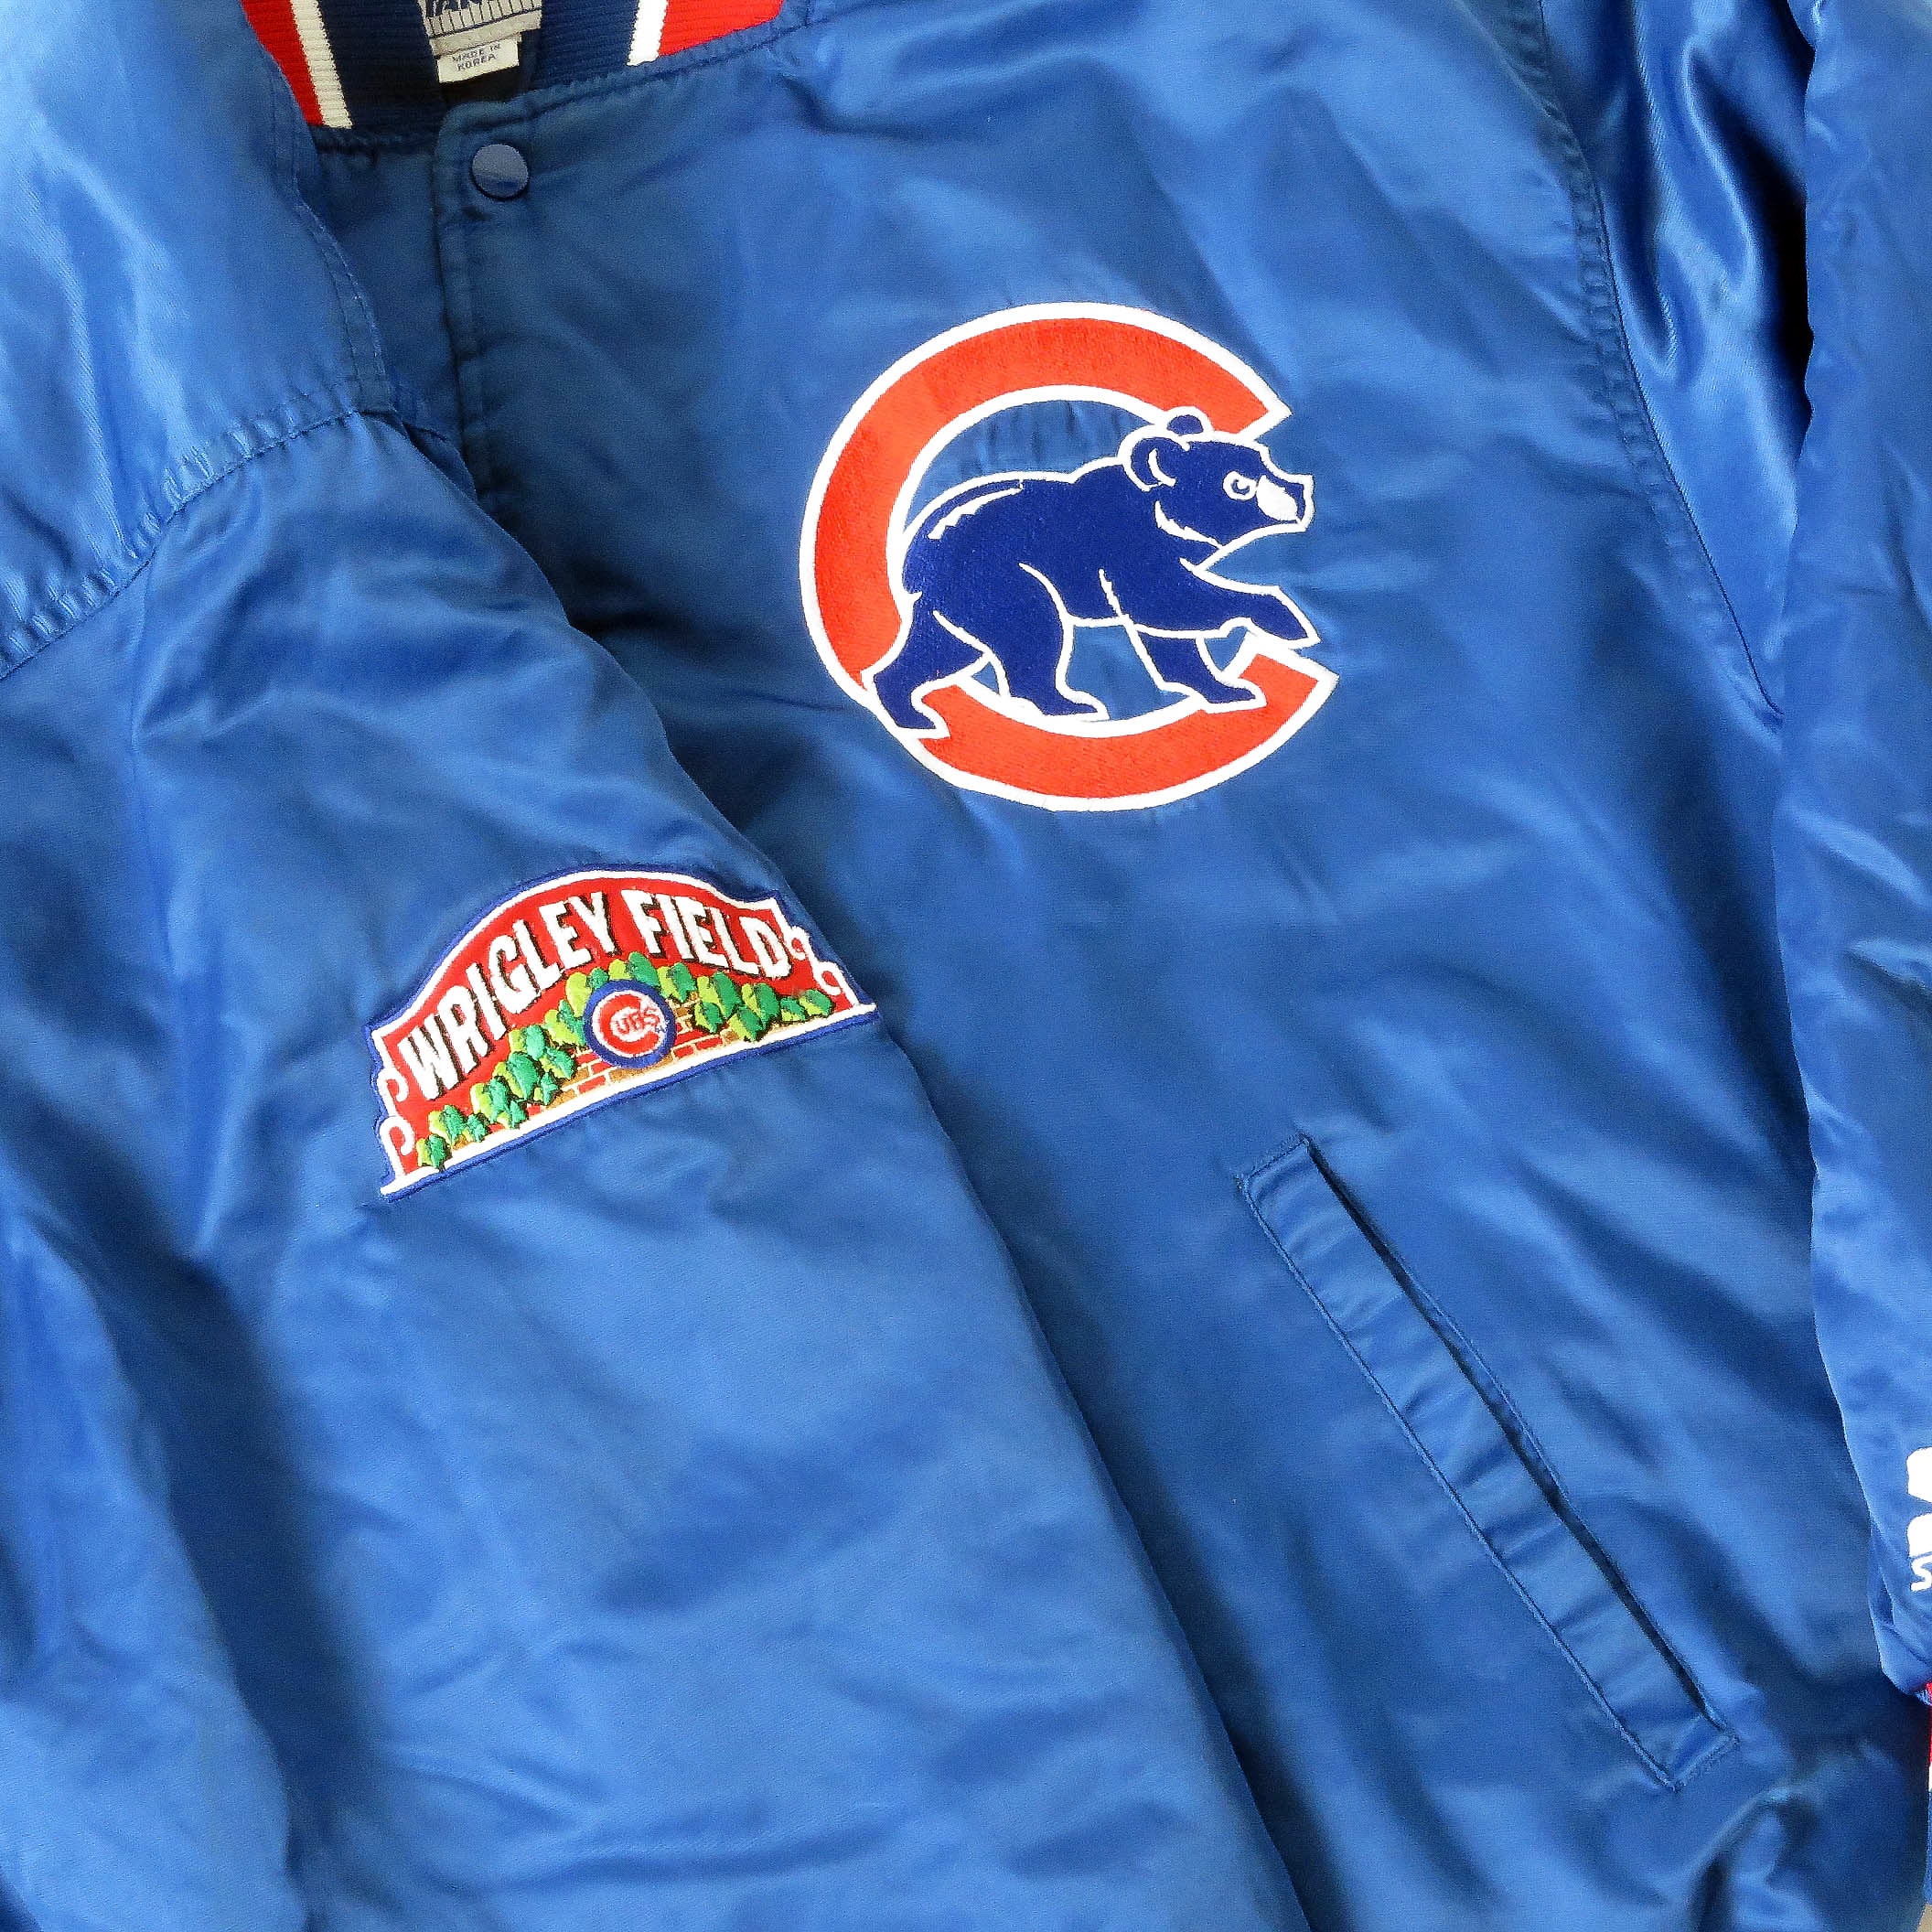 Vintage Starter Chicago Cubs Wrigley Field Diamond Collection Satin Jacket  Large